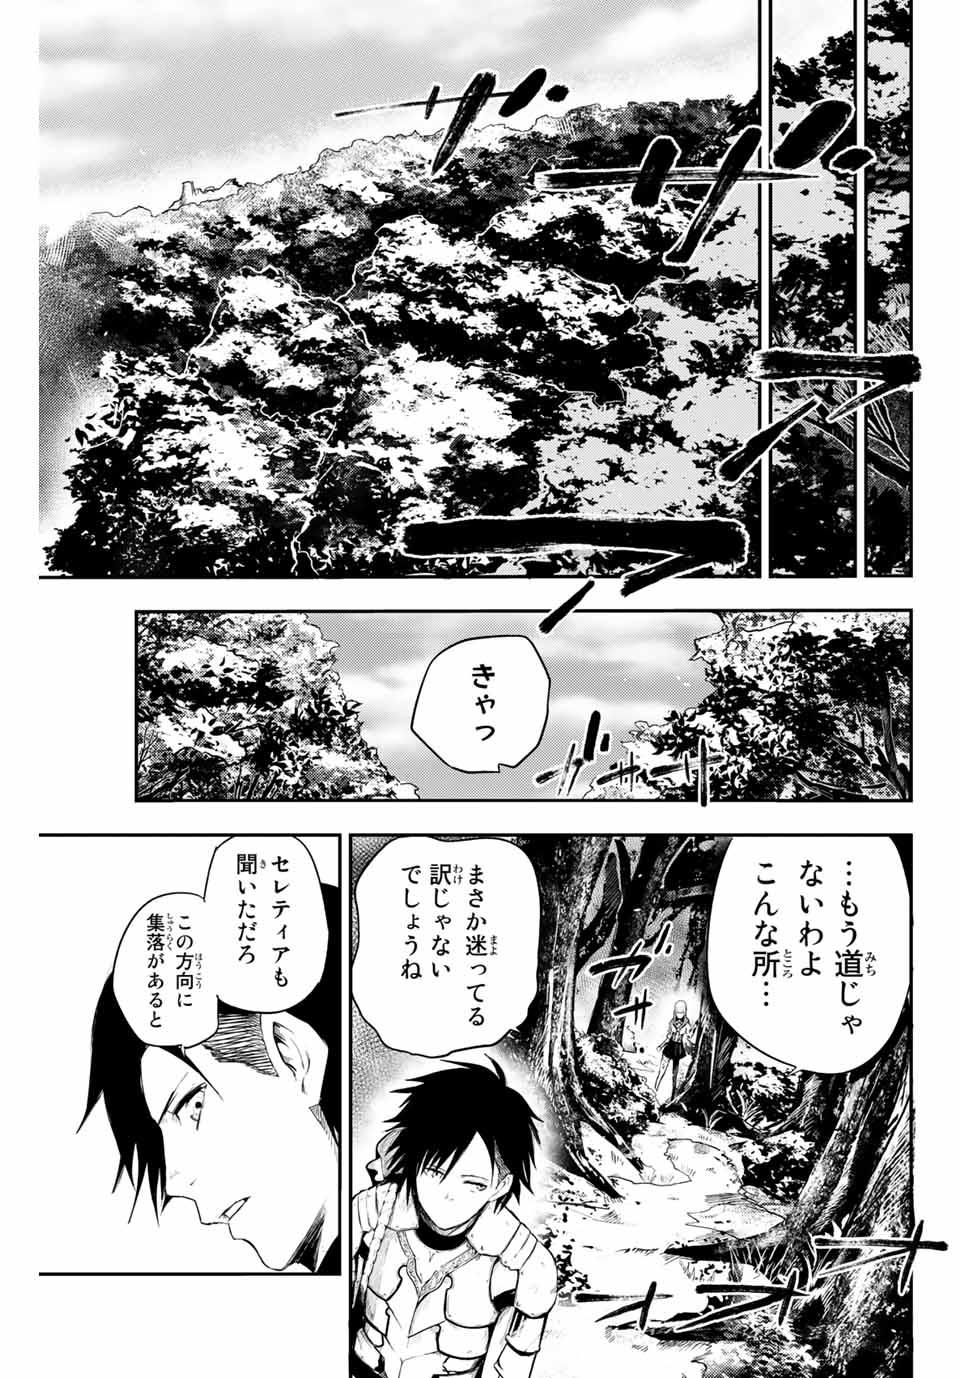 the strongest former prince-; 奴隷転生 ～その奴隷、最強の元王子につき～ 第6話 - Page 9